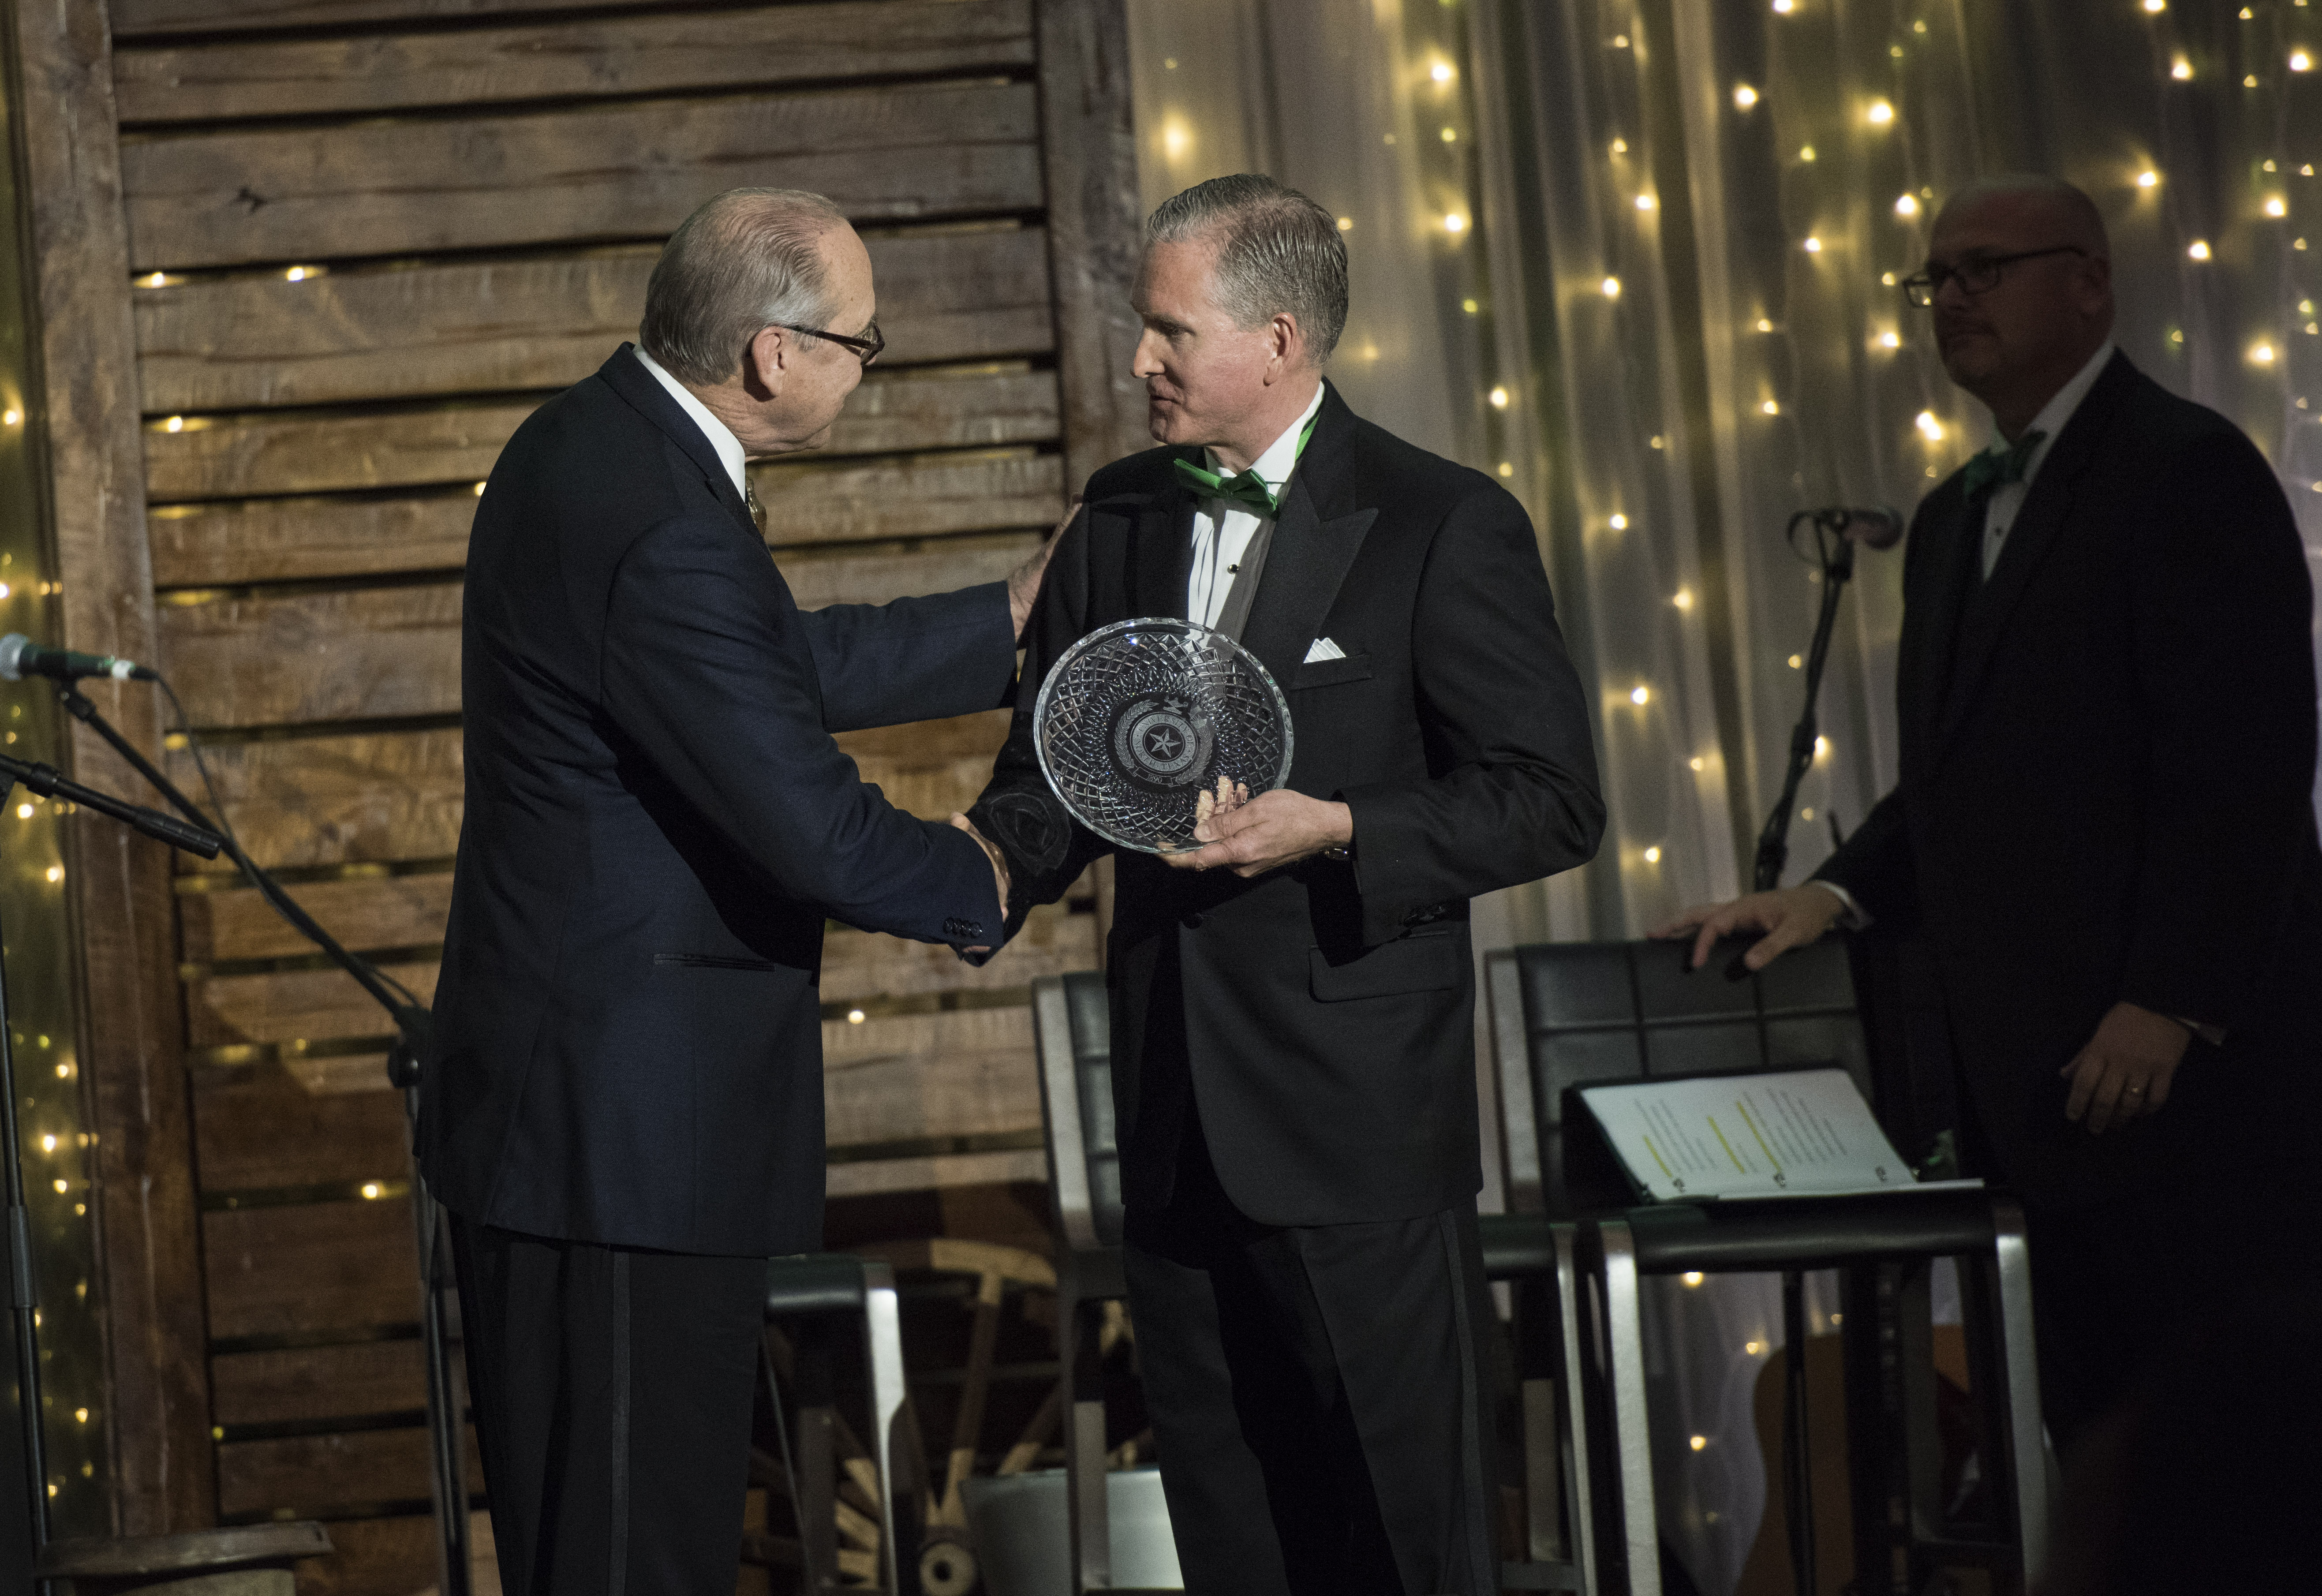 UNT alumnus presented with the 2017 Wings of Eagles Presidential Award